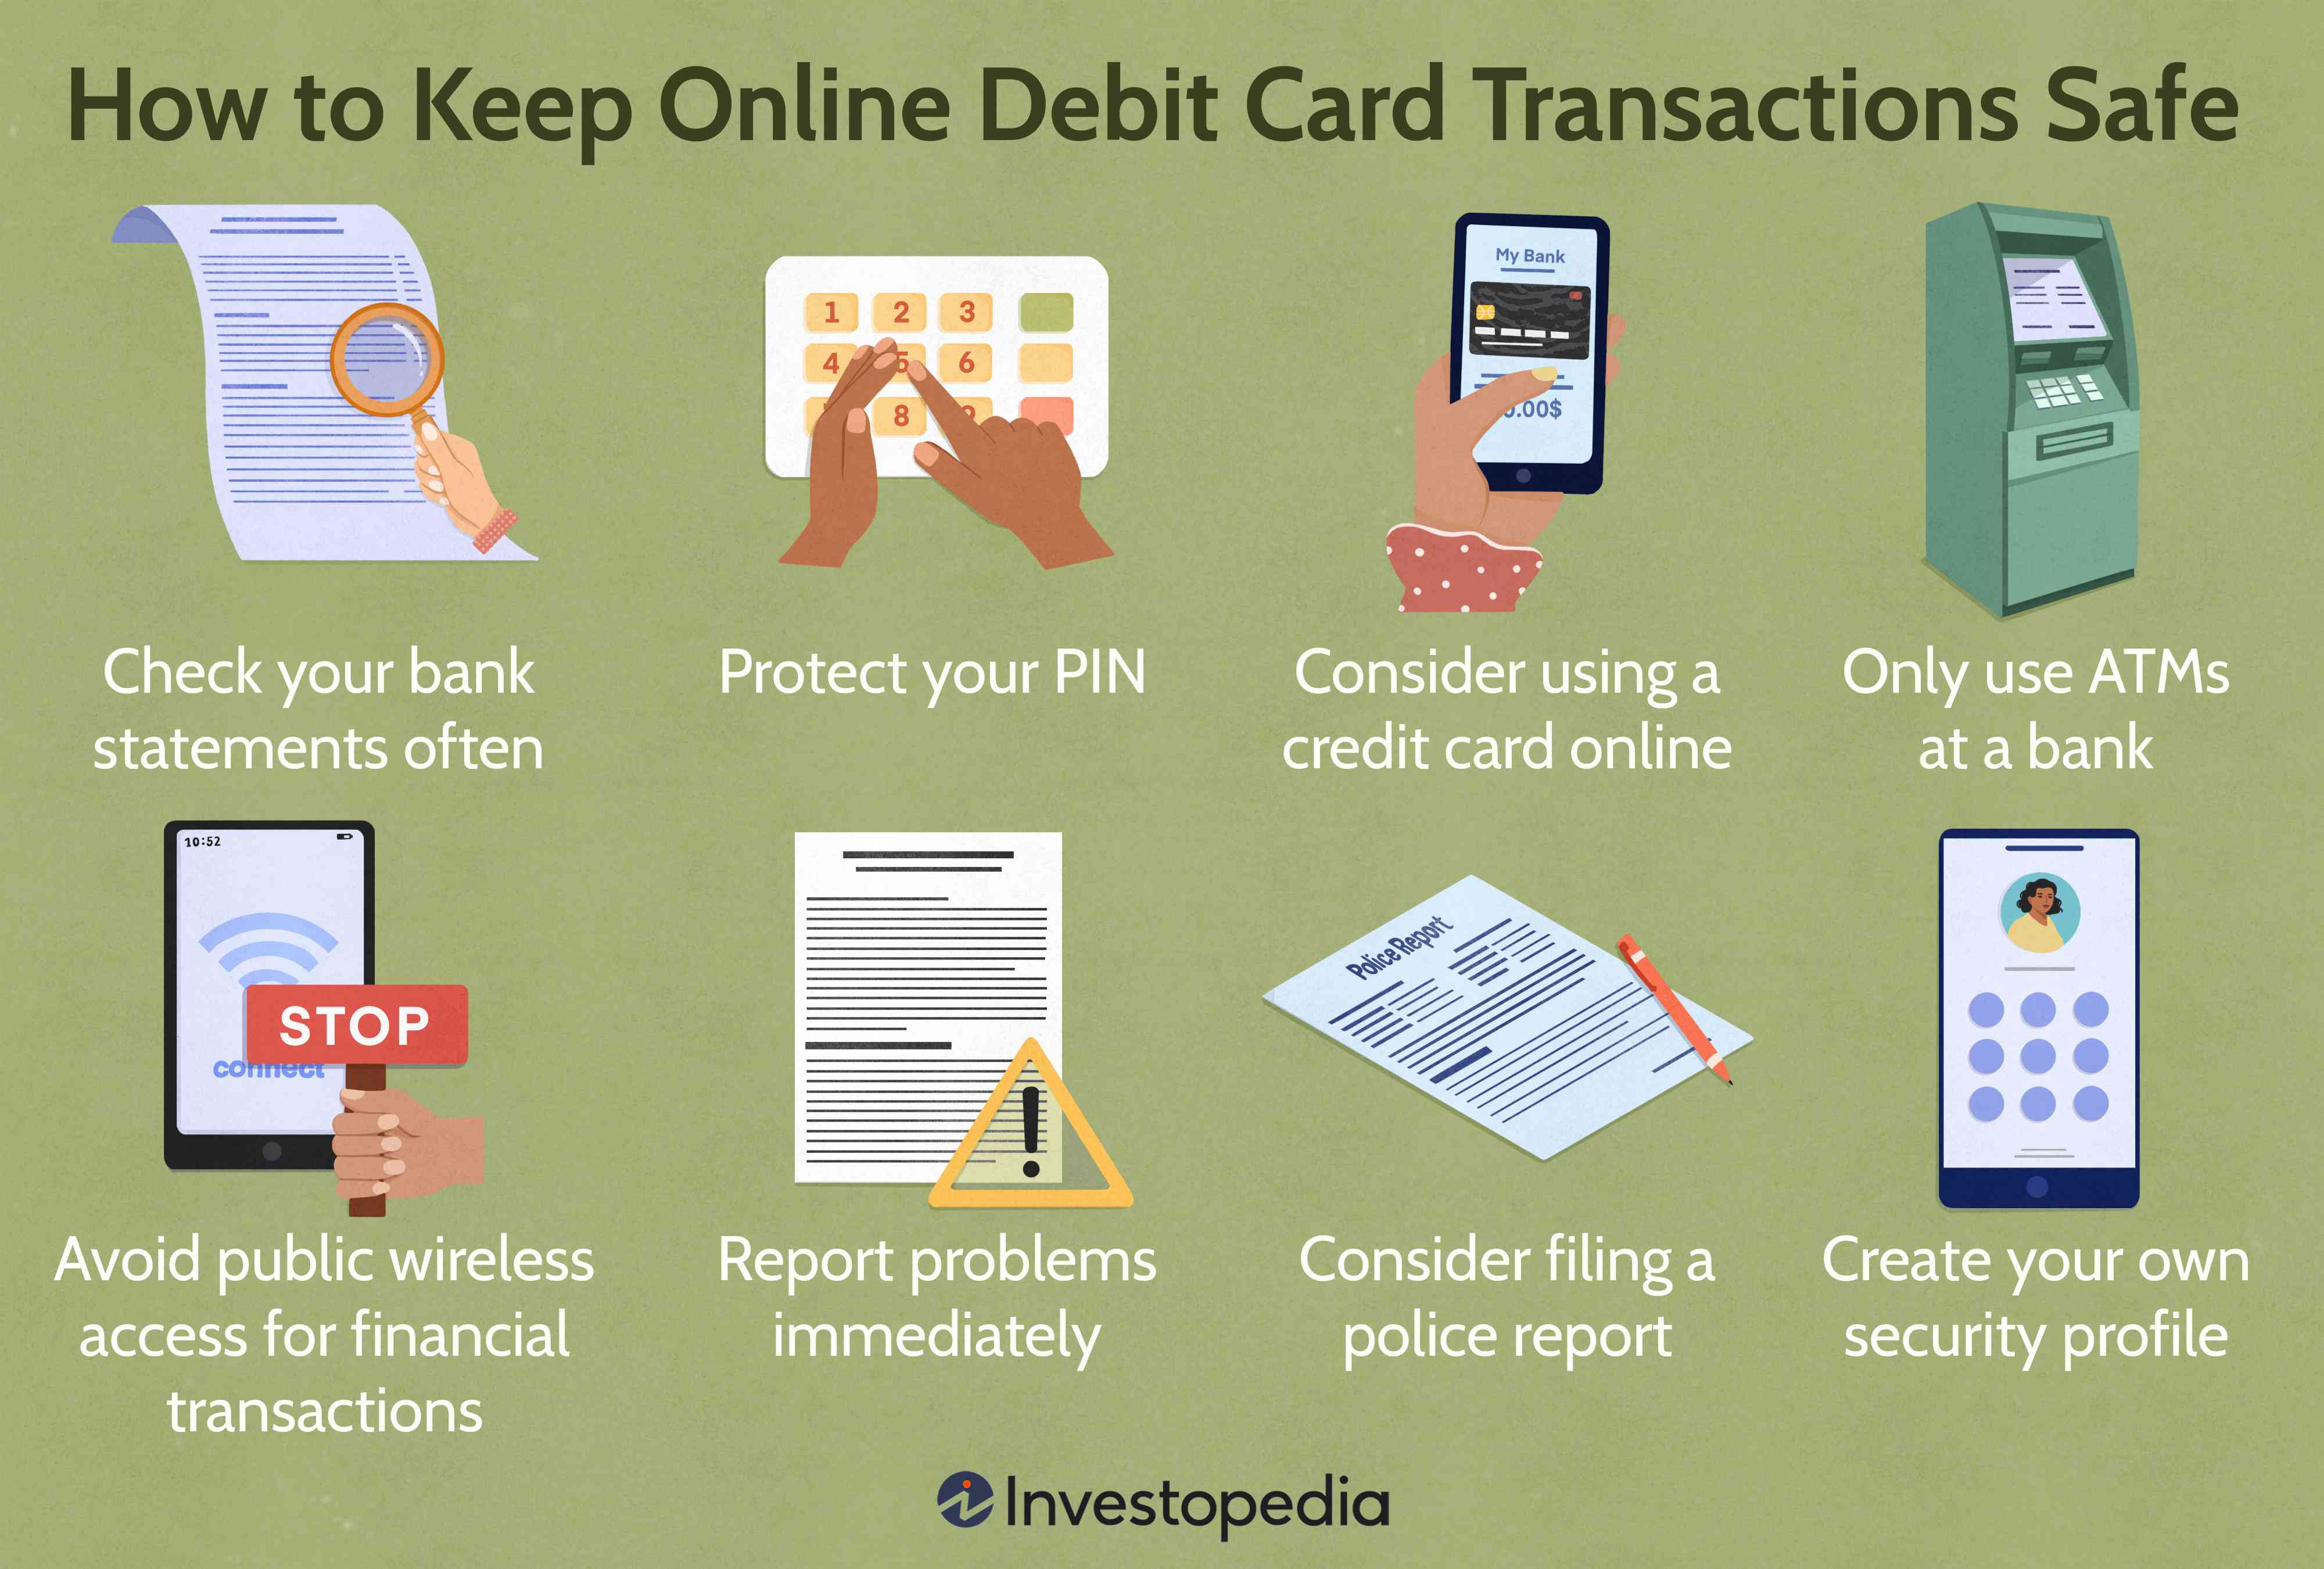 How to Keep Online Debit Card Transactions Safe